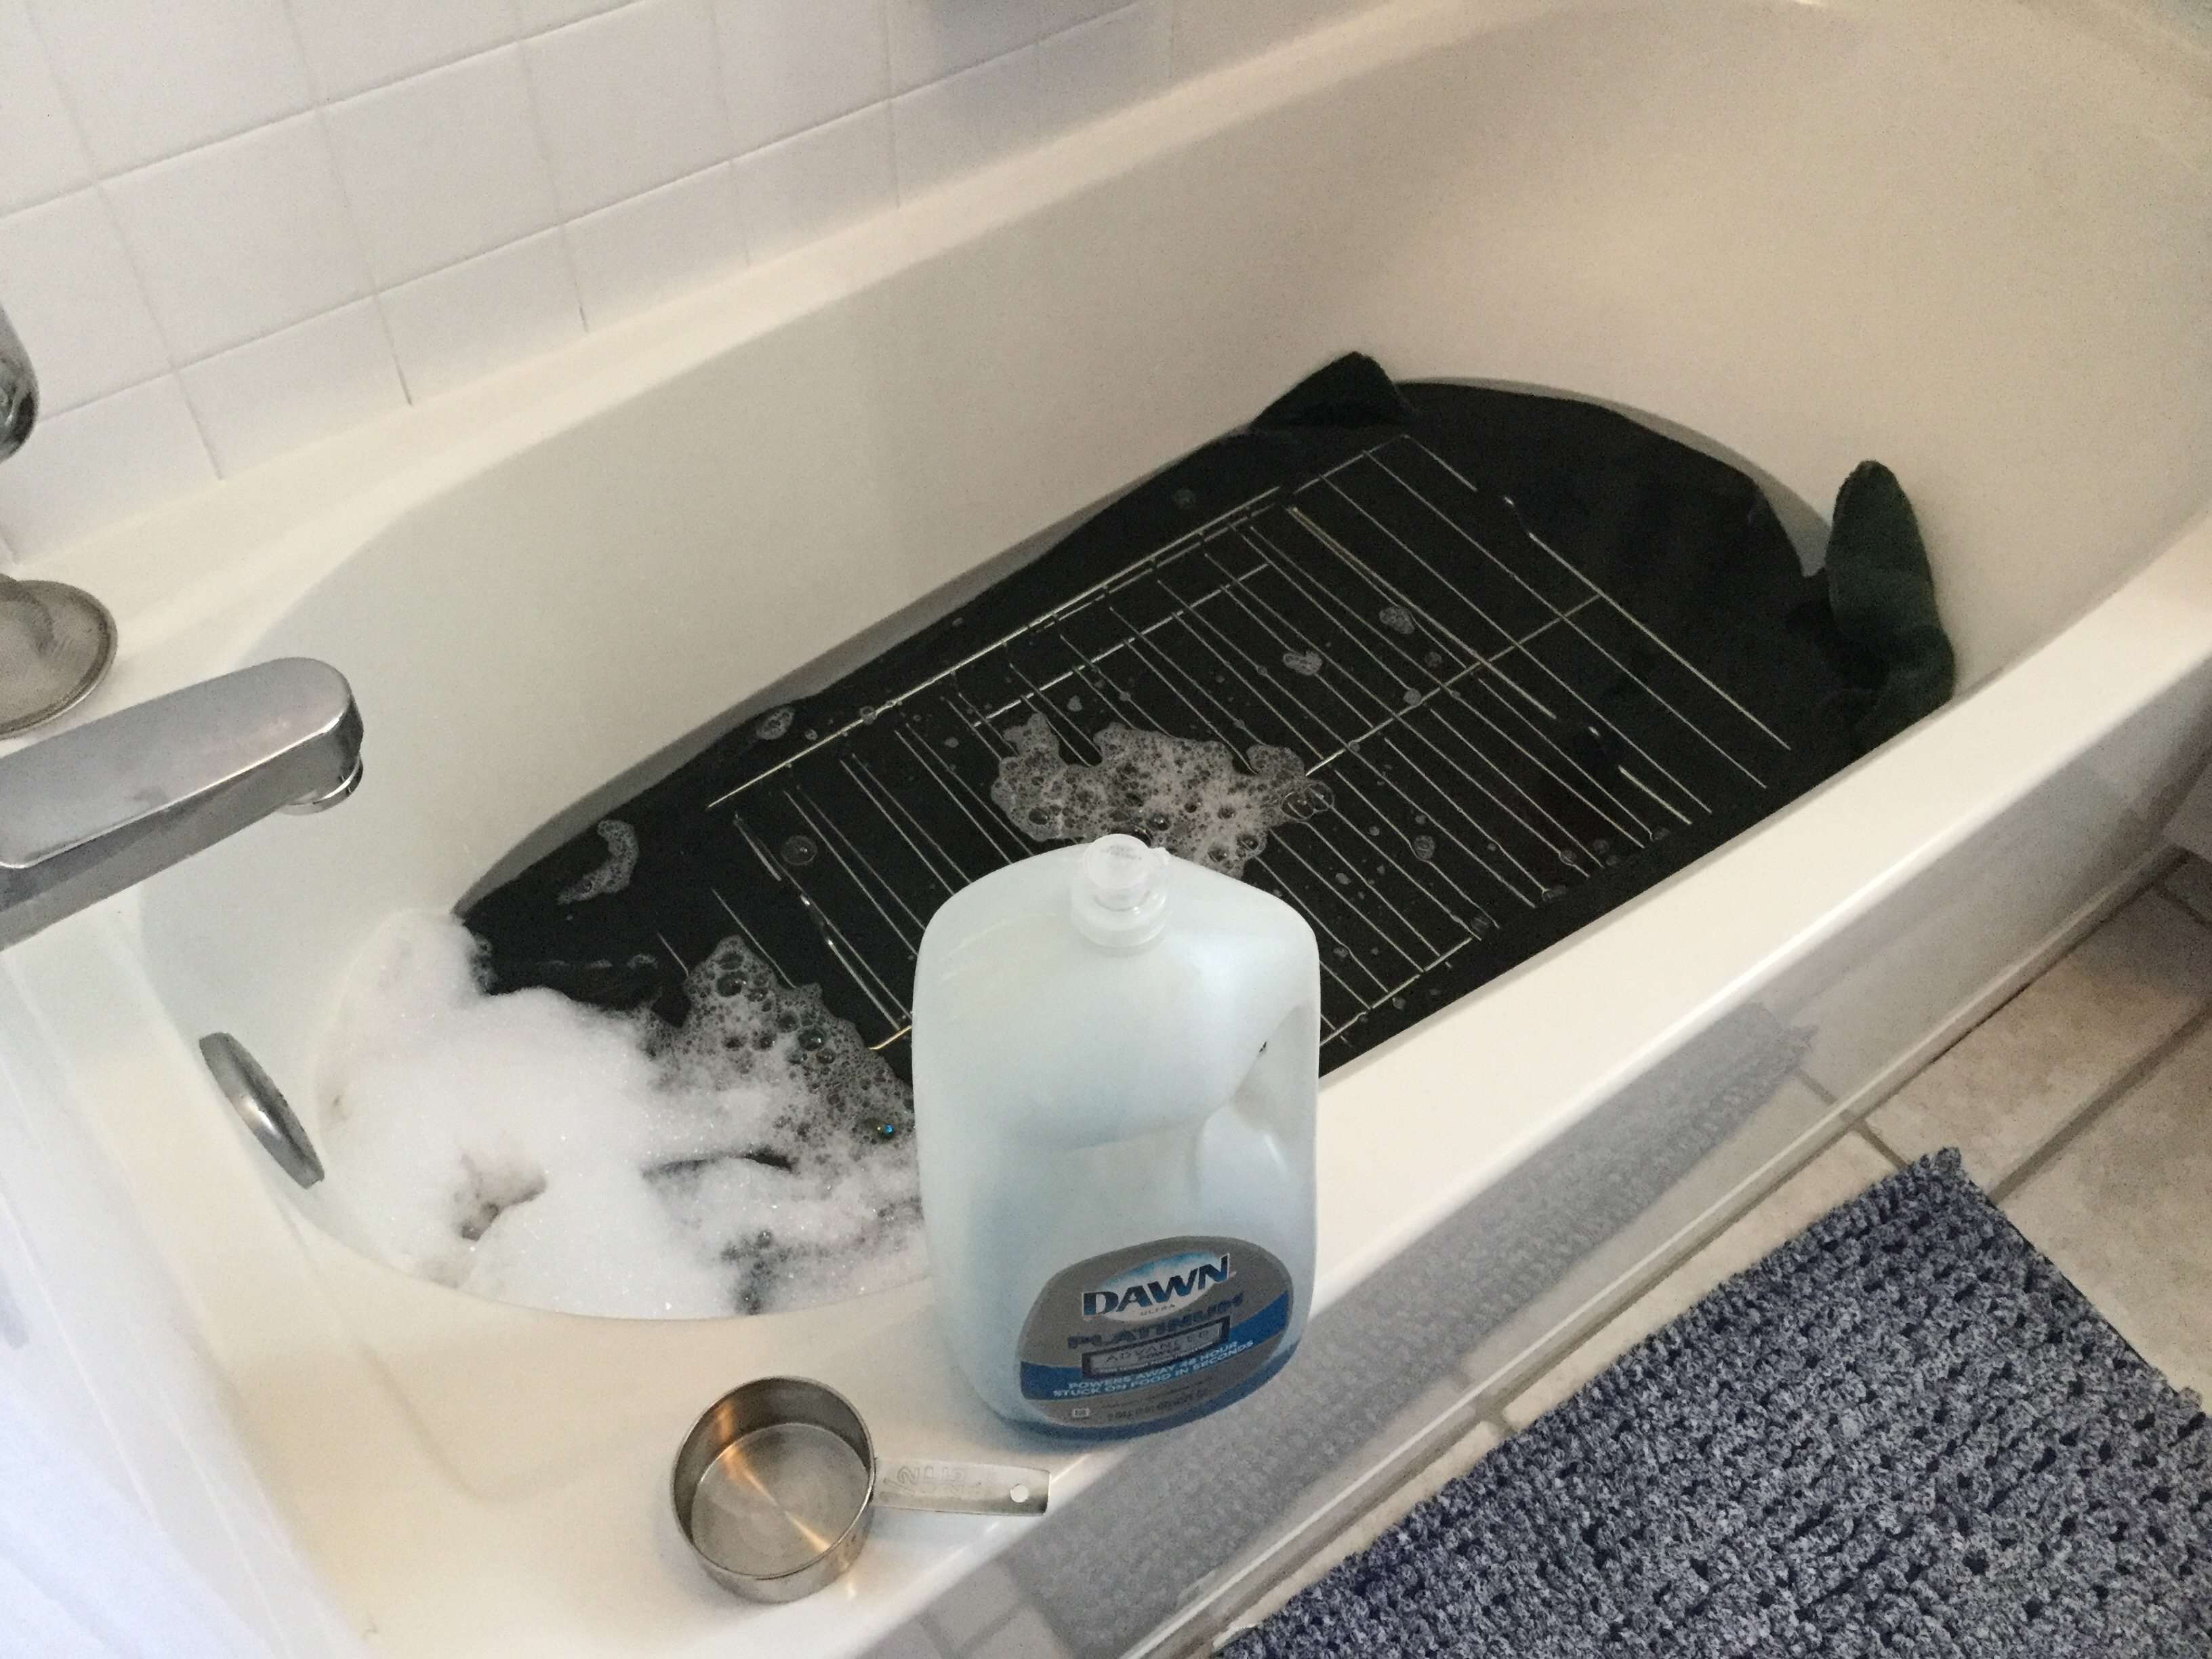 Place a towel in the bottom of your bath tub to protect your tub. Lay your oven racks on top of the towel. Add 1/2 cup dish soap (like Castile or Dawn) and fill the tub with hot water just until it covers the oven racks. Let them soak for 8 hours. The dish soap is cutting through all that grease.